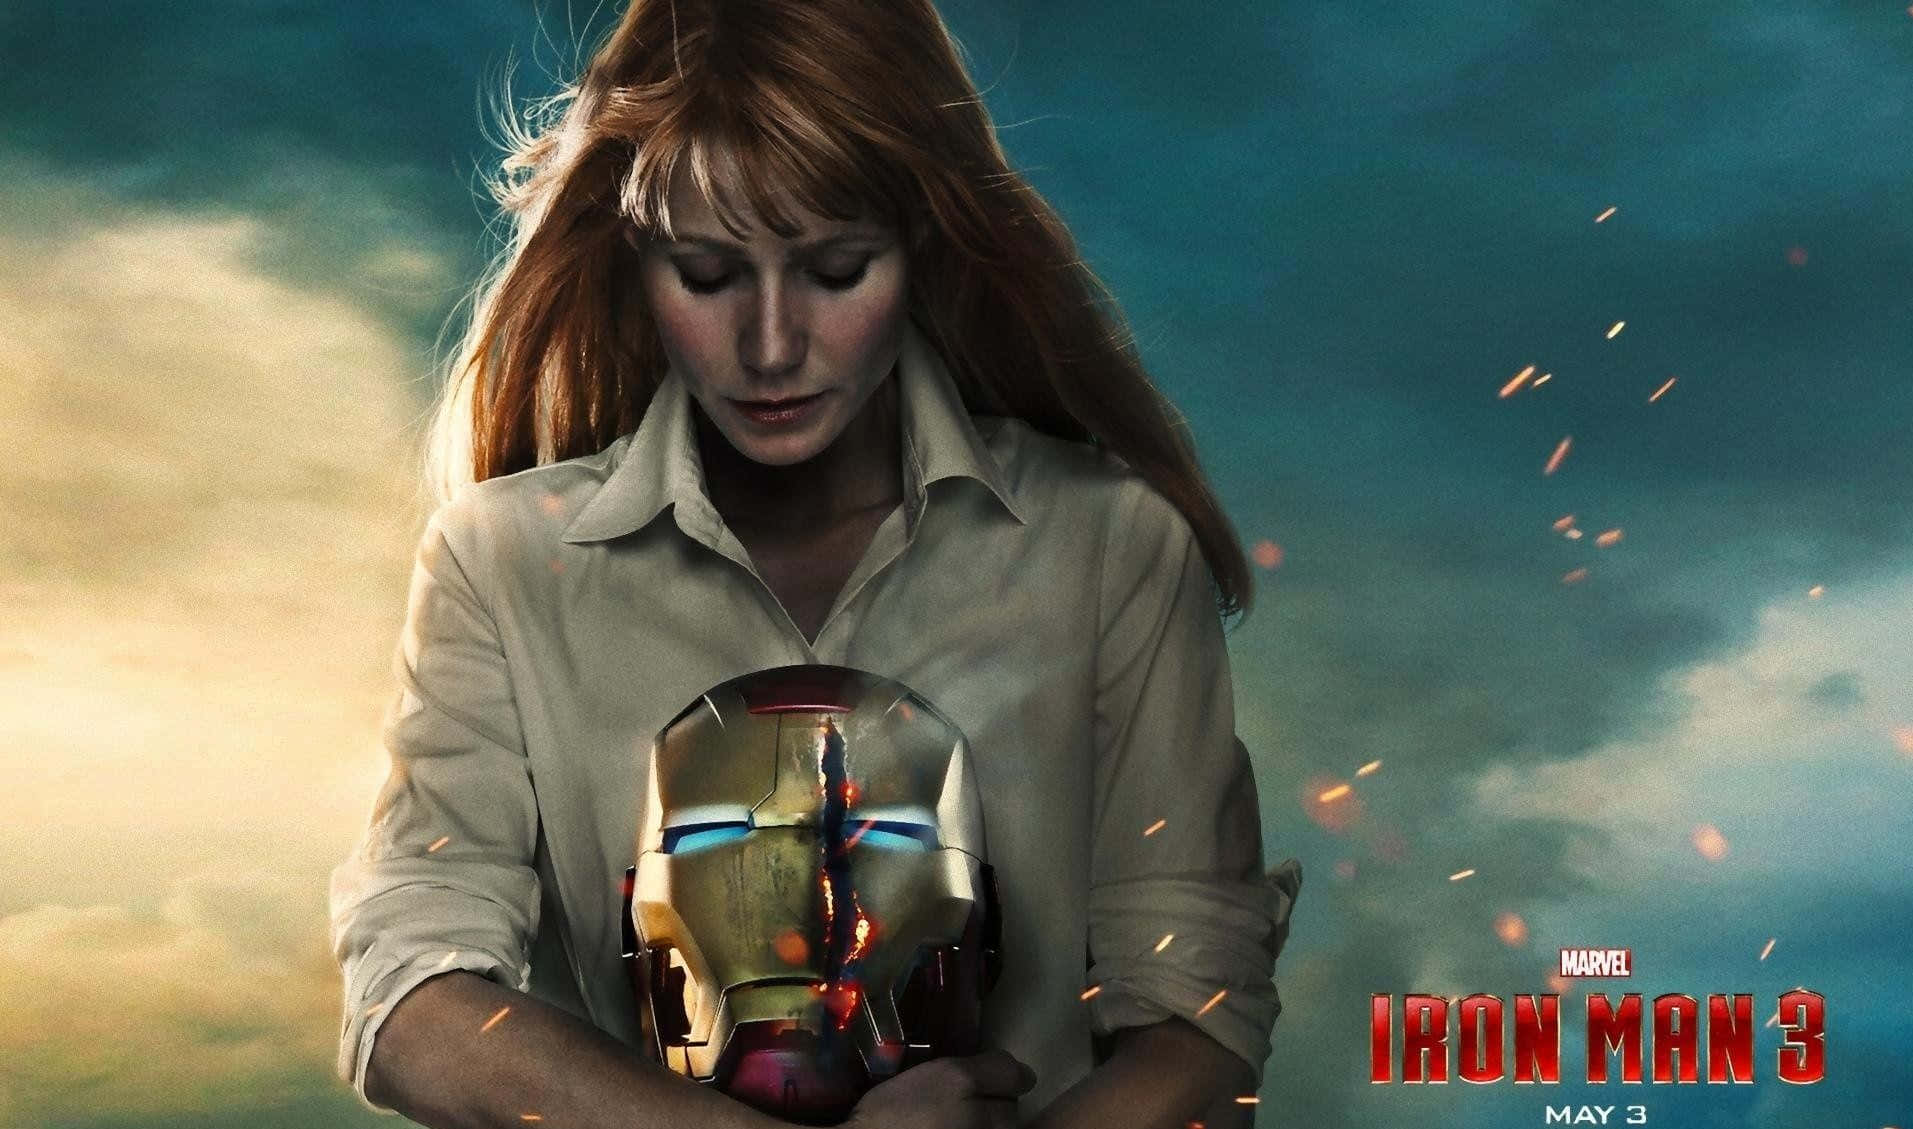 Pepper Potts looking stunning in a close-up shot Wallpaper